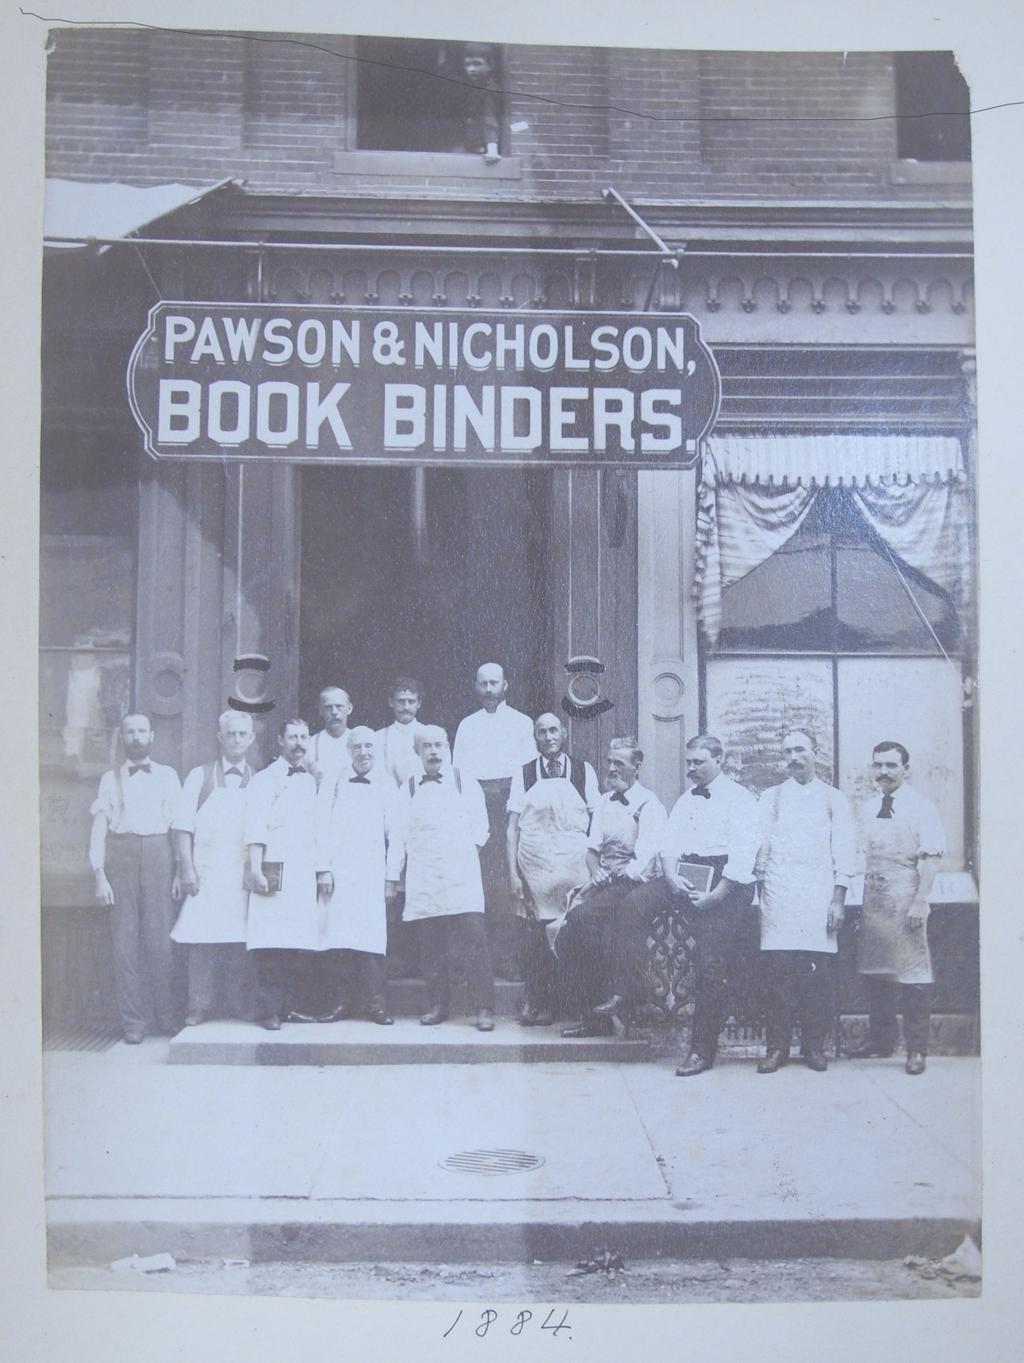 Image from Library Company collections, Nicholson is likely bearded man, fifth